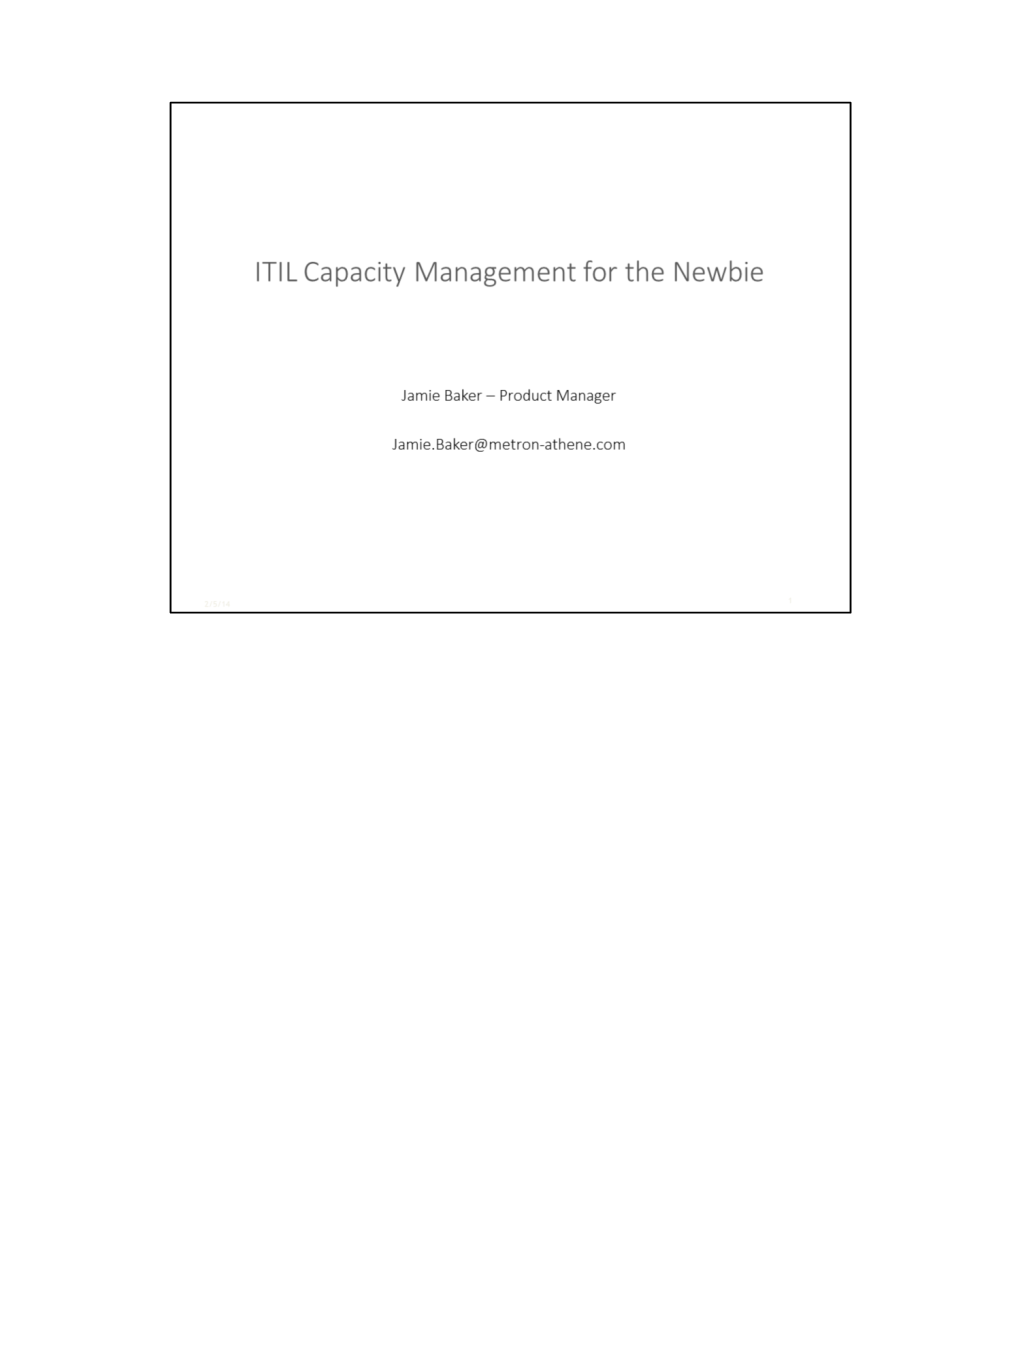 ITIL Capacity Management for the Newbie